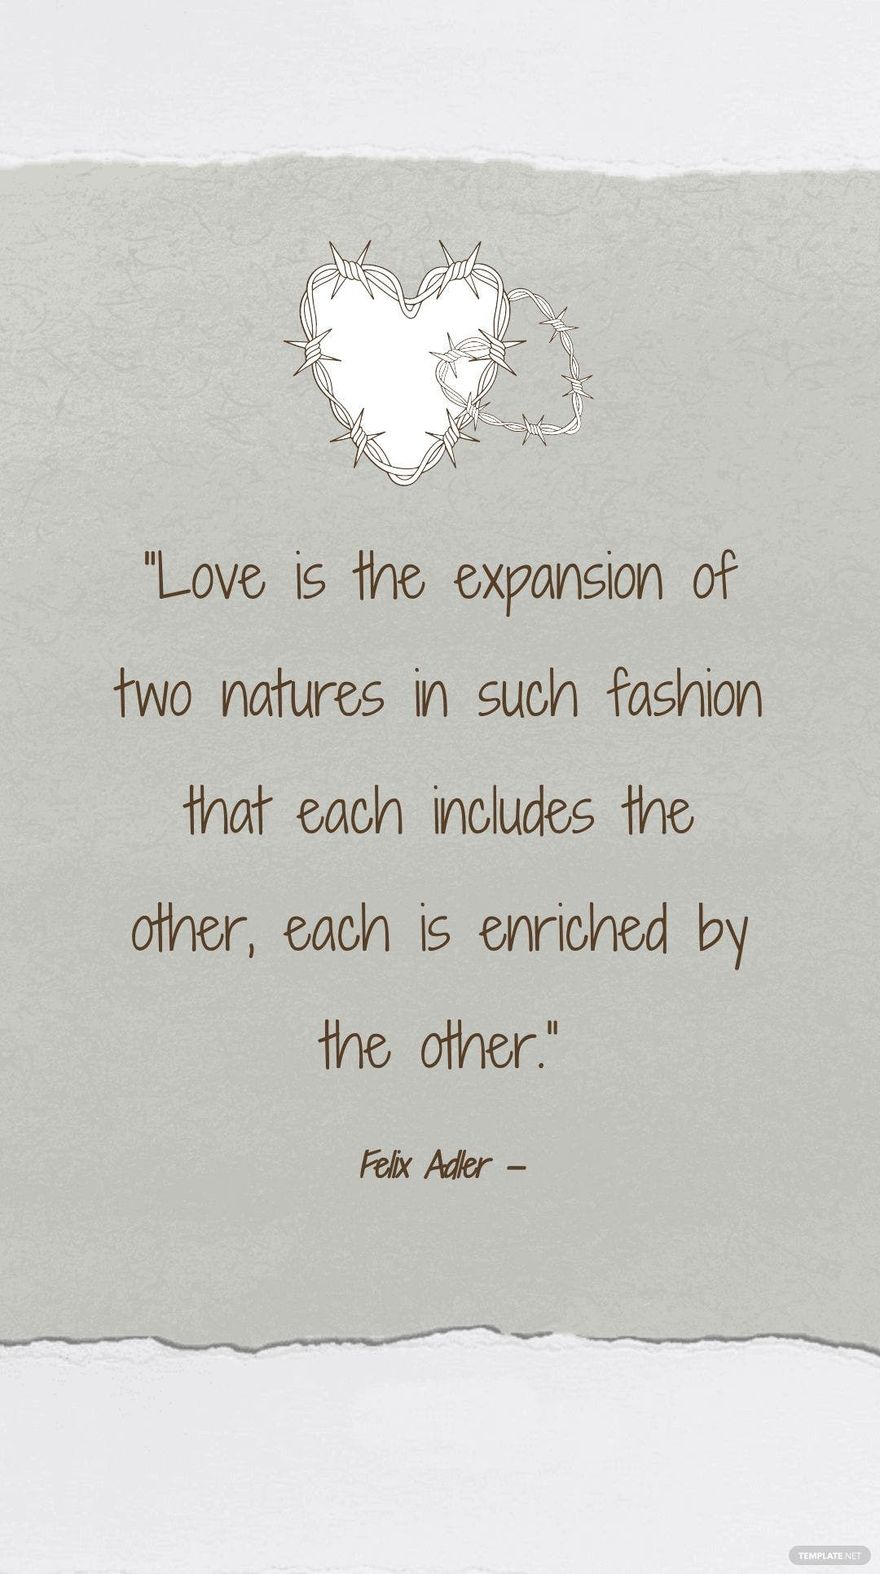 Felix Adler — “Love is the expansion of two natures in such fashion that each includes the other, each is enriched by the other.”